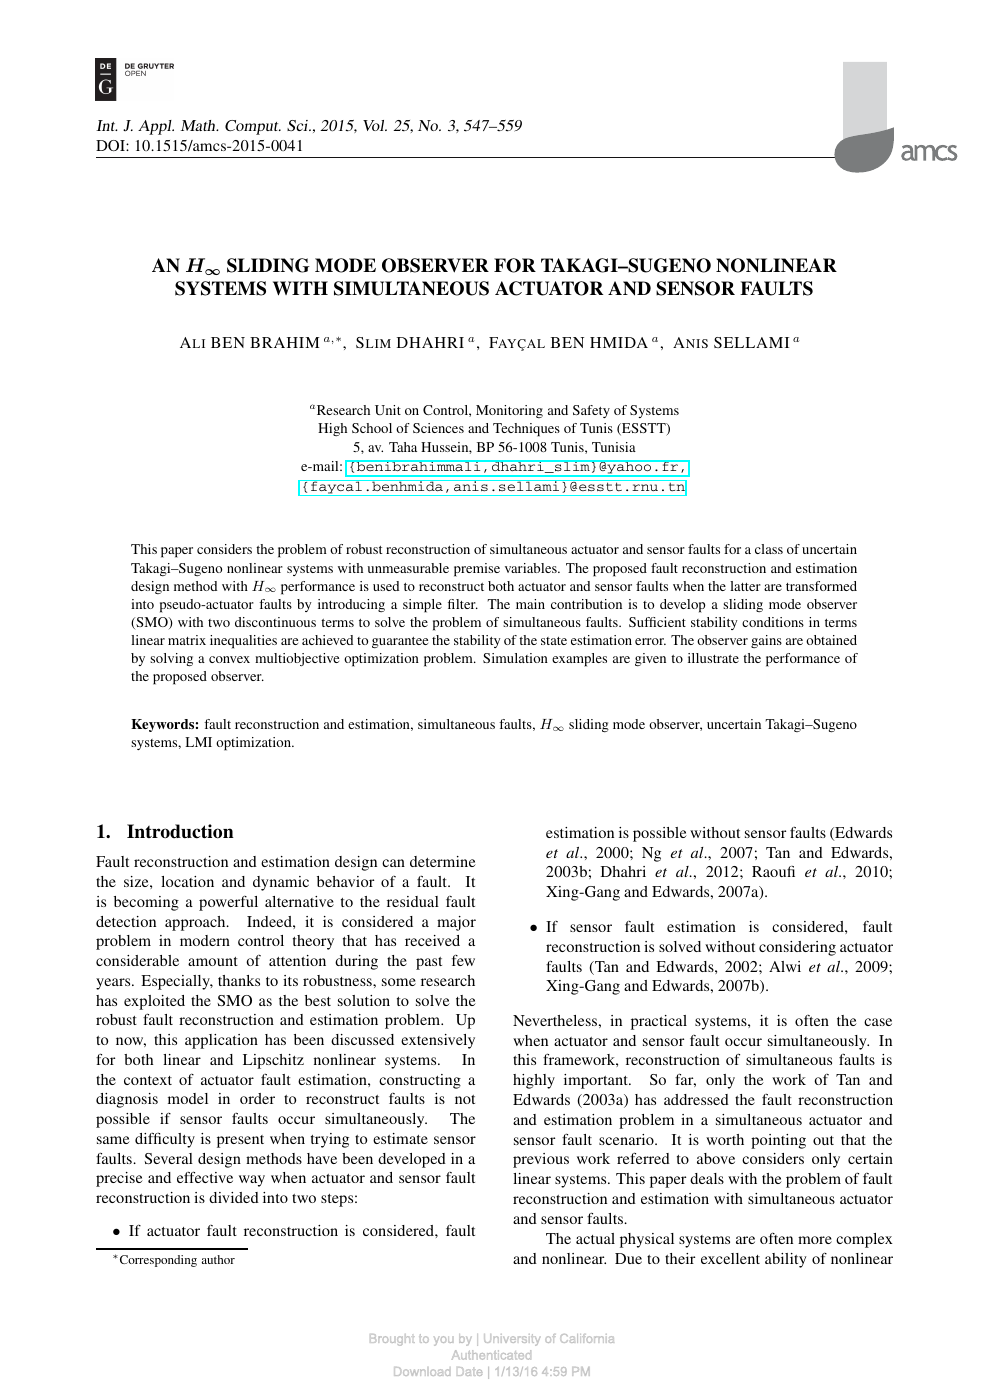 An H Sliding Mode Observer For Takagi Sugeno Nonlinear Systems With Simultaneous Actuator And Sensor Faults Topic Of Research Paper In Mathematics Download Scholarly Article Pdf And Read For Free On Cyberleninka